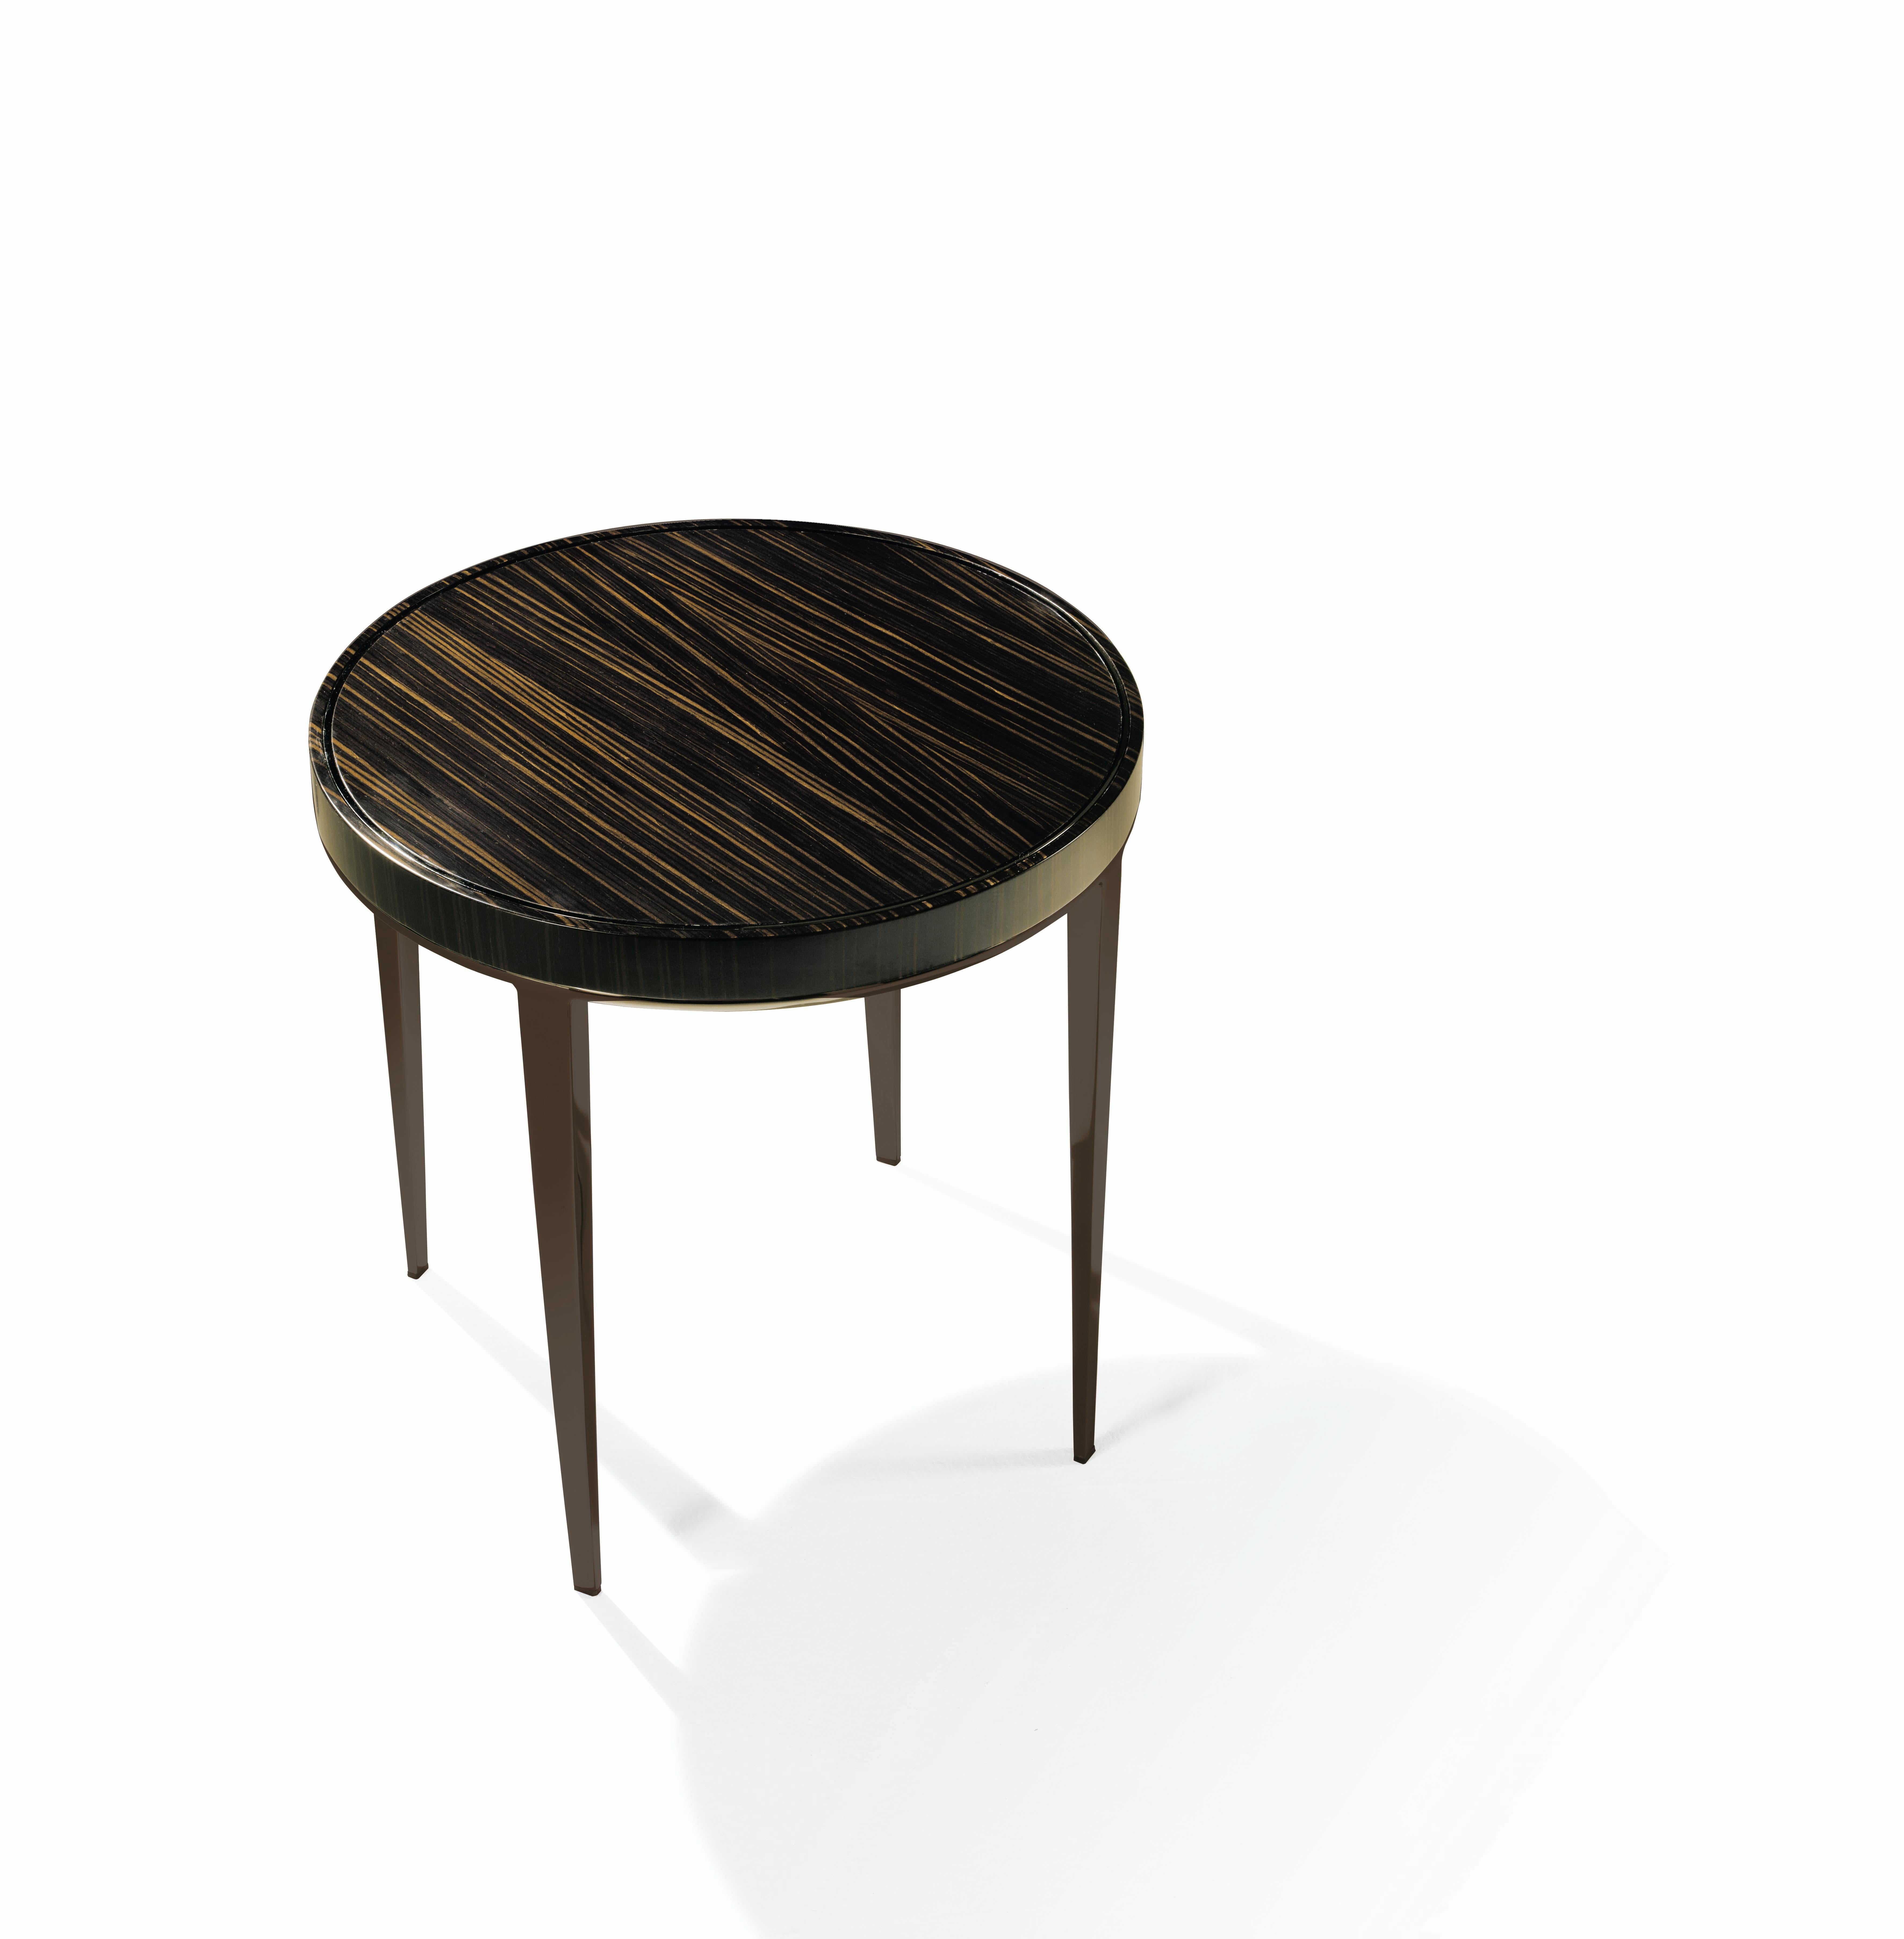 Top and edge in dark stained Ebony matte finish, polished black nickel trim on top, polished black nickel legs.